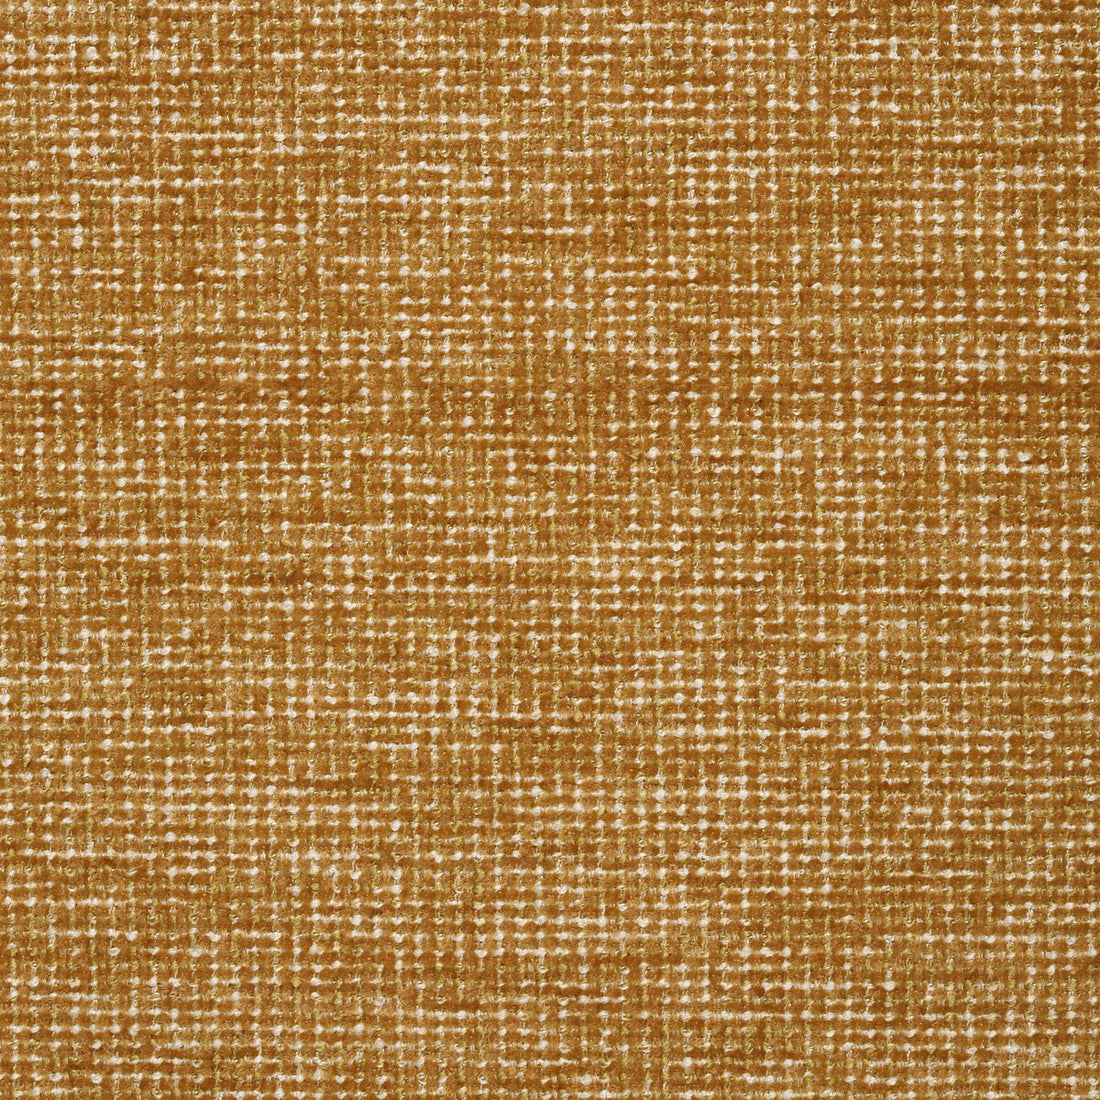 Kravet Smart fabric in 35115-12 color - pattern 35115.12.0 - by Kravet Smart in the Crypton Home collection